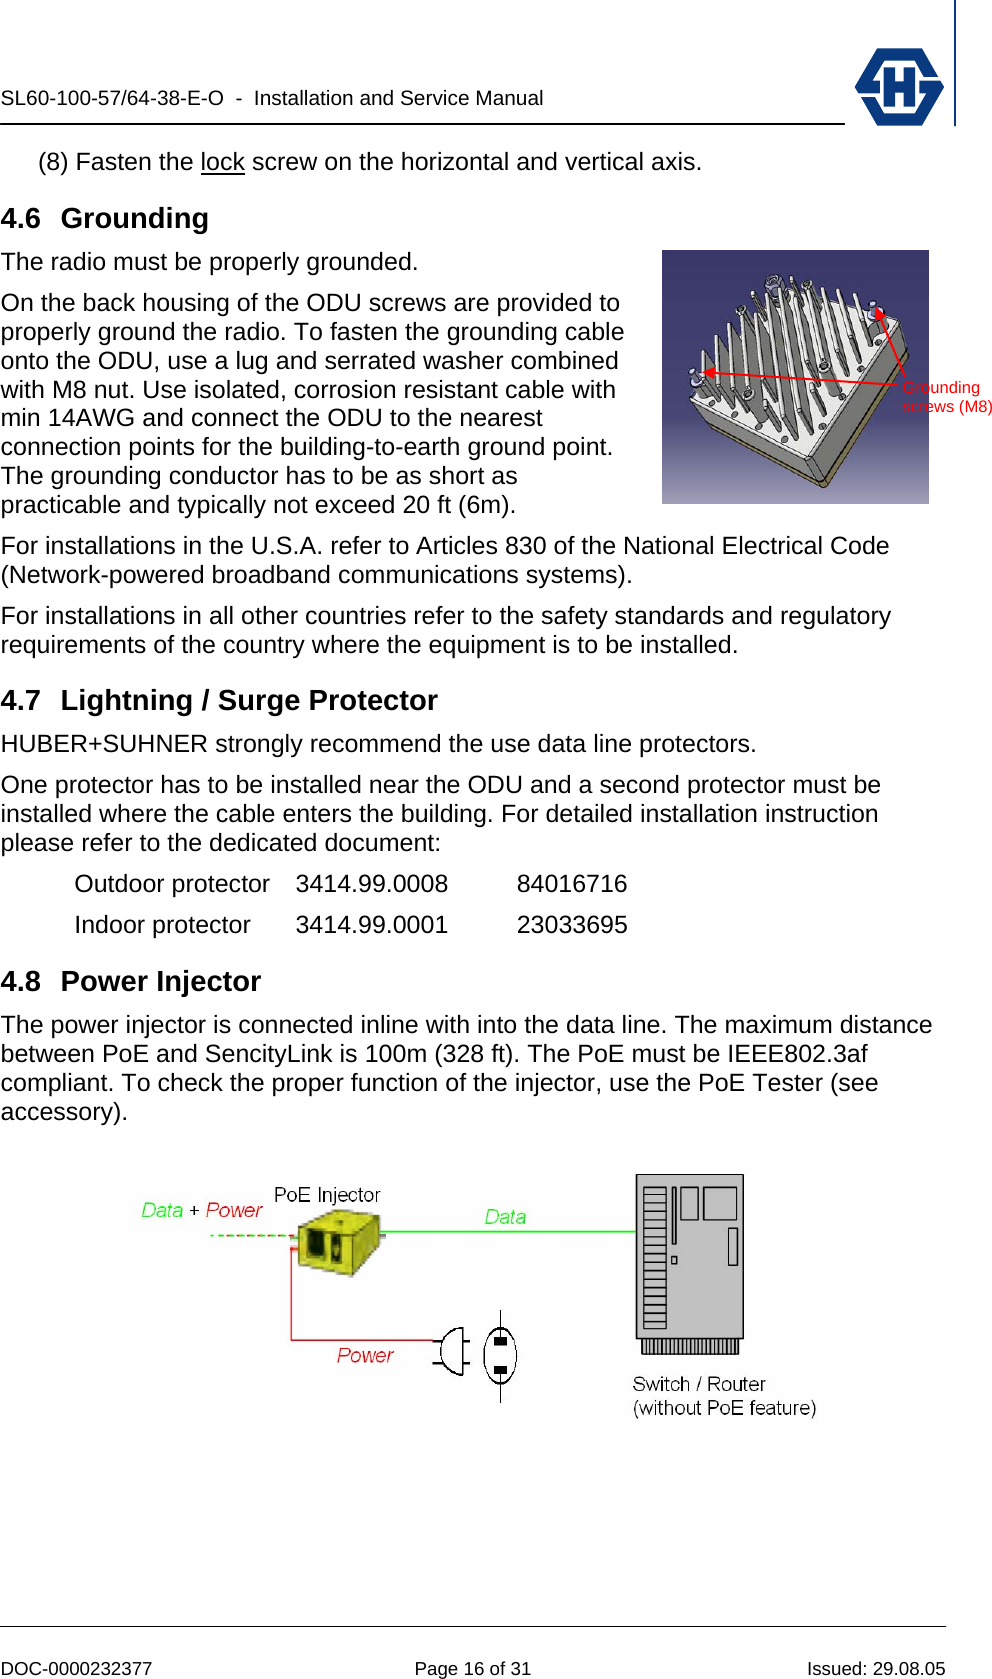 SL60-100-57/64-38-E-O  -  Installation and Service Manual   DOC-0000232377  Page 16 of 31  Issued: 29.08.05 (8) Fasten the lock screw on the horizontal and vertical axis. 4.6 Grounding The radio must be properly grounded. On the back housing of the ODU screws are provided to properly ground the radio. To fasten the grounding cable onto the ODU, use a lug and serrated washer combined with M8 nut. Use isolated, corrosion resistant cable with min 14AWG and connect the ODU to the nearest connection points for the building-to-earth ground point. The grounding conductor has to be as short as practicable and typically not exceed 20 ft (6m). For installations in the U.S.A. refer to Articles 830 of the National Electrical Code (Network-powered broadband communications systems). For installations in all other countries refer to the safety standards and regulatory requirements of the country where the equipment is to be installed. 4.7  Lightning / Surge Protector HUBER+SUHNER strongly recommend the use data line protectors. One protector has to be installed near the ODU and a second protector must be installed where the cable enters the building. For detailed installation instruction please refer to the dedicated document: Outdoor protector 3414.99.0008  84016716 Indoor protector  3414.99.0001  23033695 4.8 Power Injector The power injector is connected inline with into the data line. The maximum distance between PoE and SencityLink is 100m (328 ft). The PoE must be IEEE802.3af compliant. To check the proper function of the injector, use the PoE Tester (see accessory).  Grounding screws (M8)